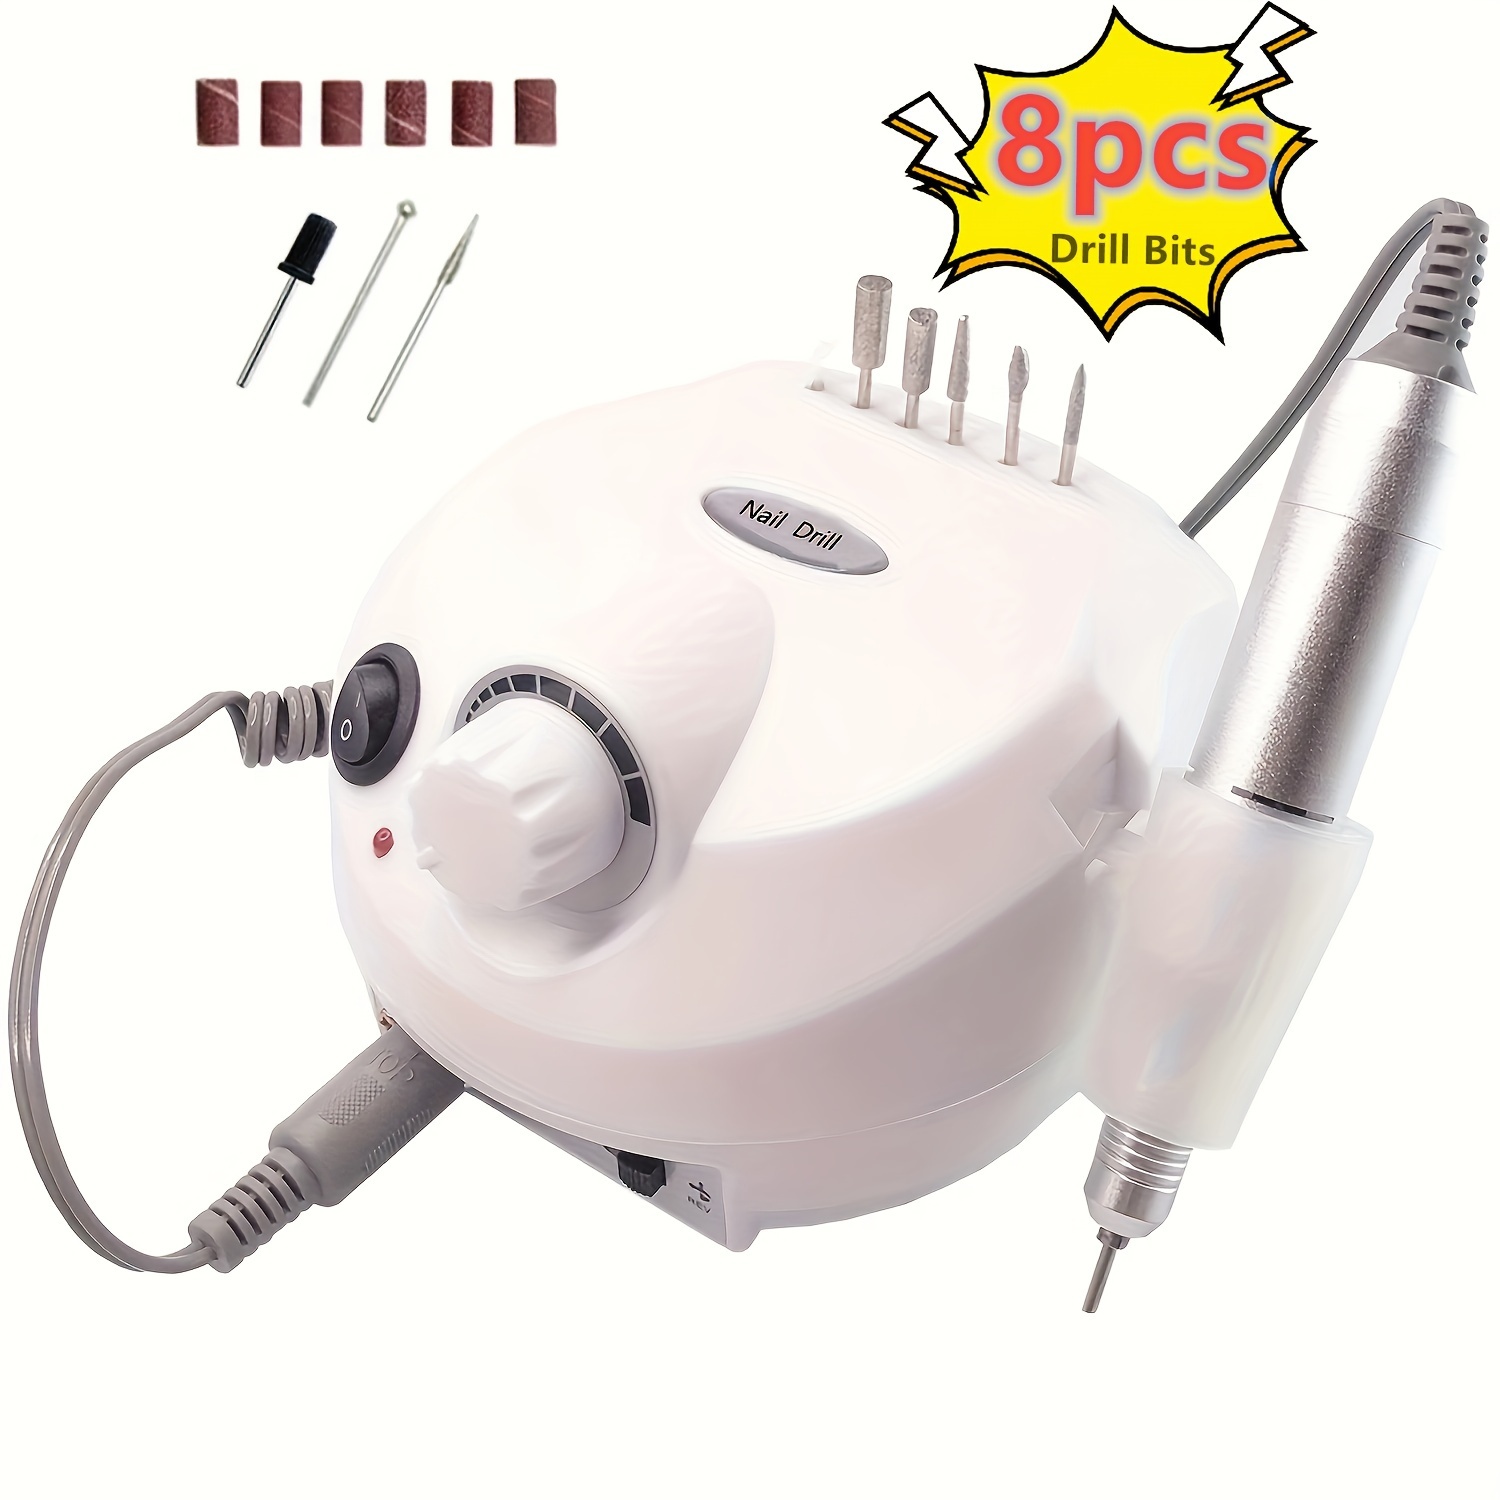 

Electric Nail Drill Machine Set, Drill Bits Included, Low Noise & Vibration For Gel Nails, Manicure & Pedicure, With Foot Pedal And Handpiece Holder, Salon Use